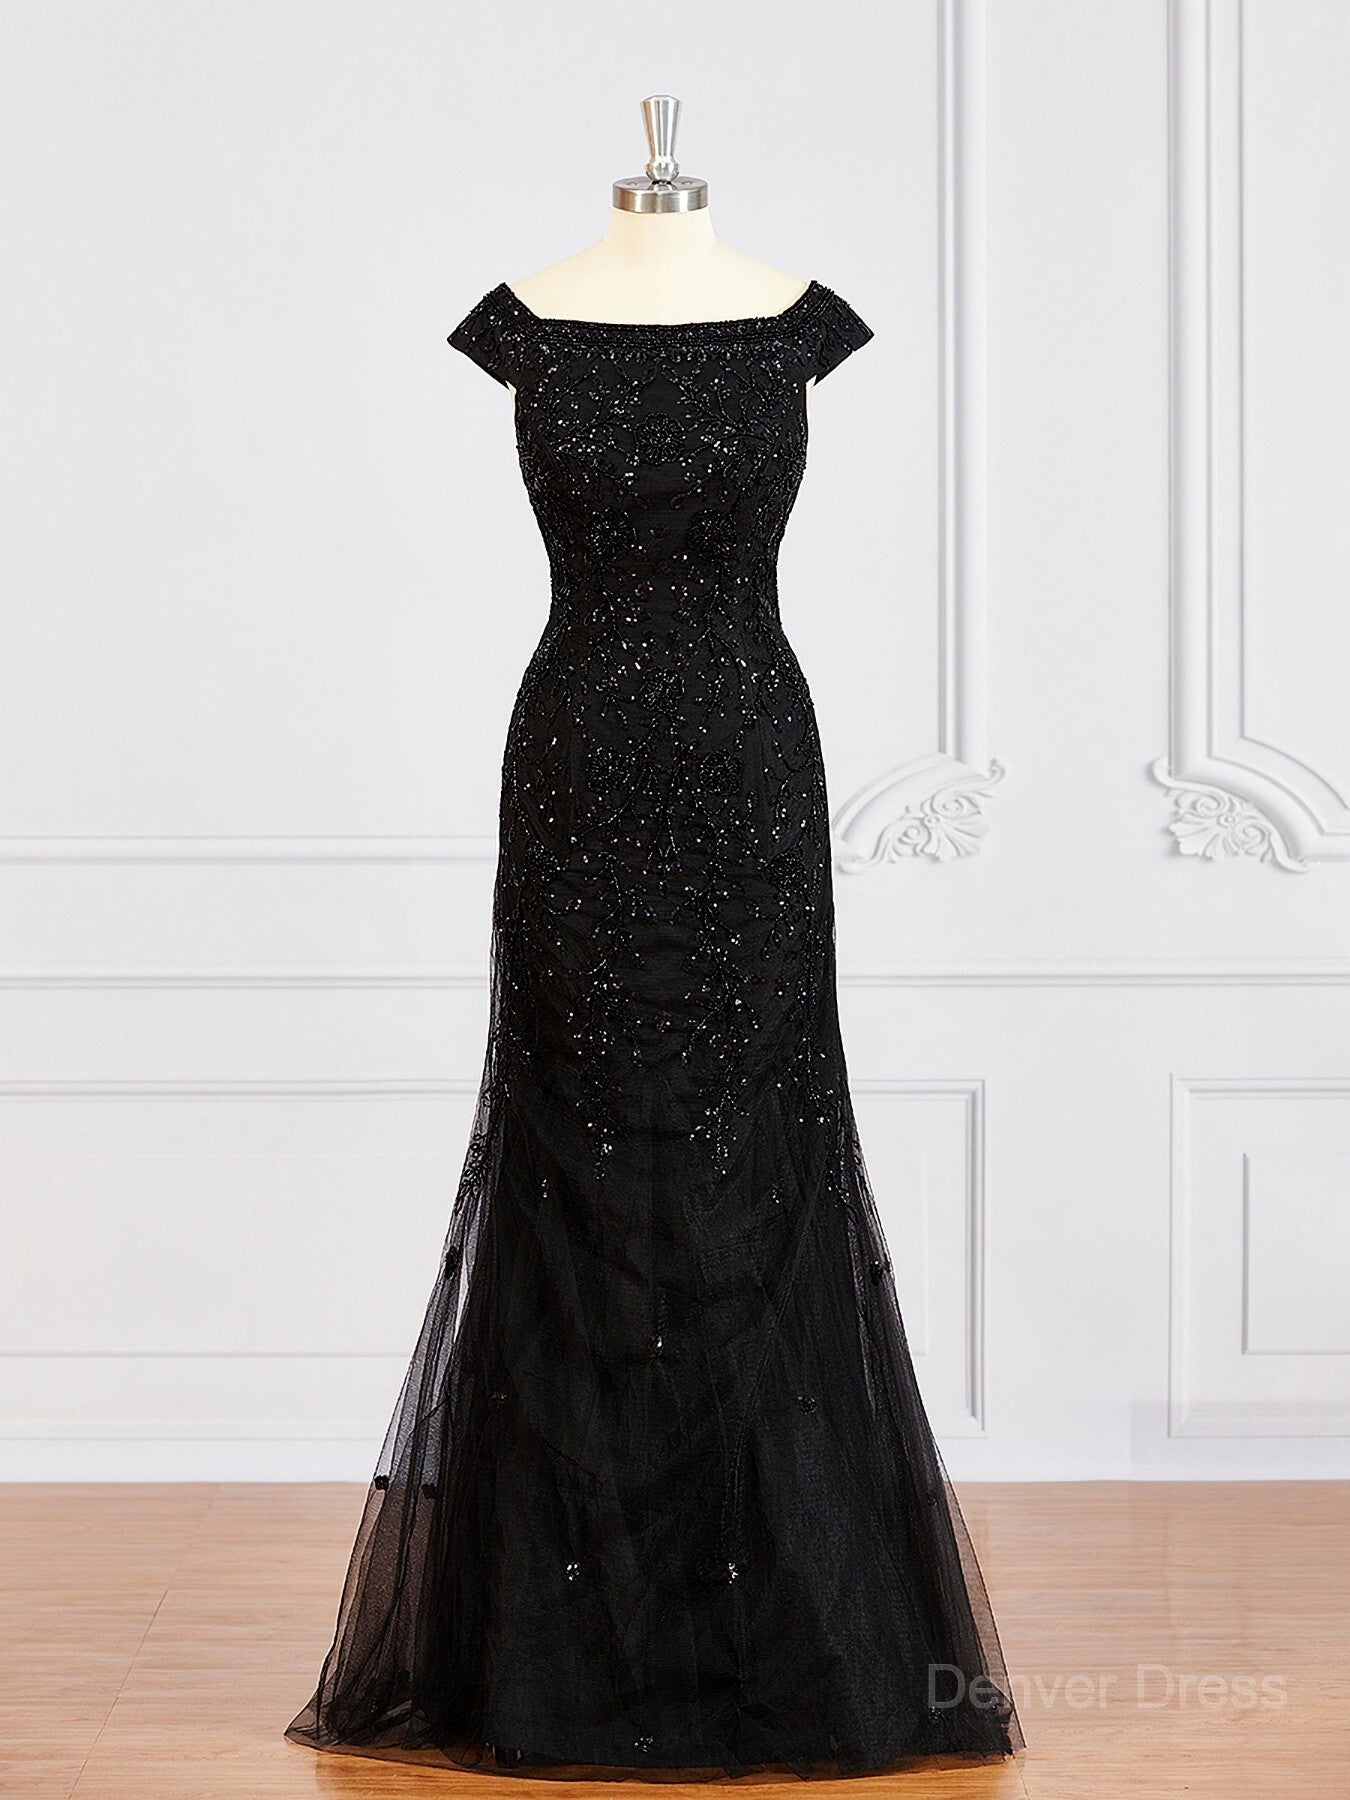 Sheath Off-the-Shoulder Floor-Length Tulle Mother of the Bride Dresses For Black girls With Beading